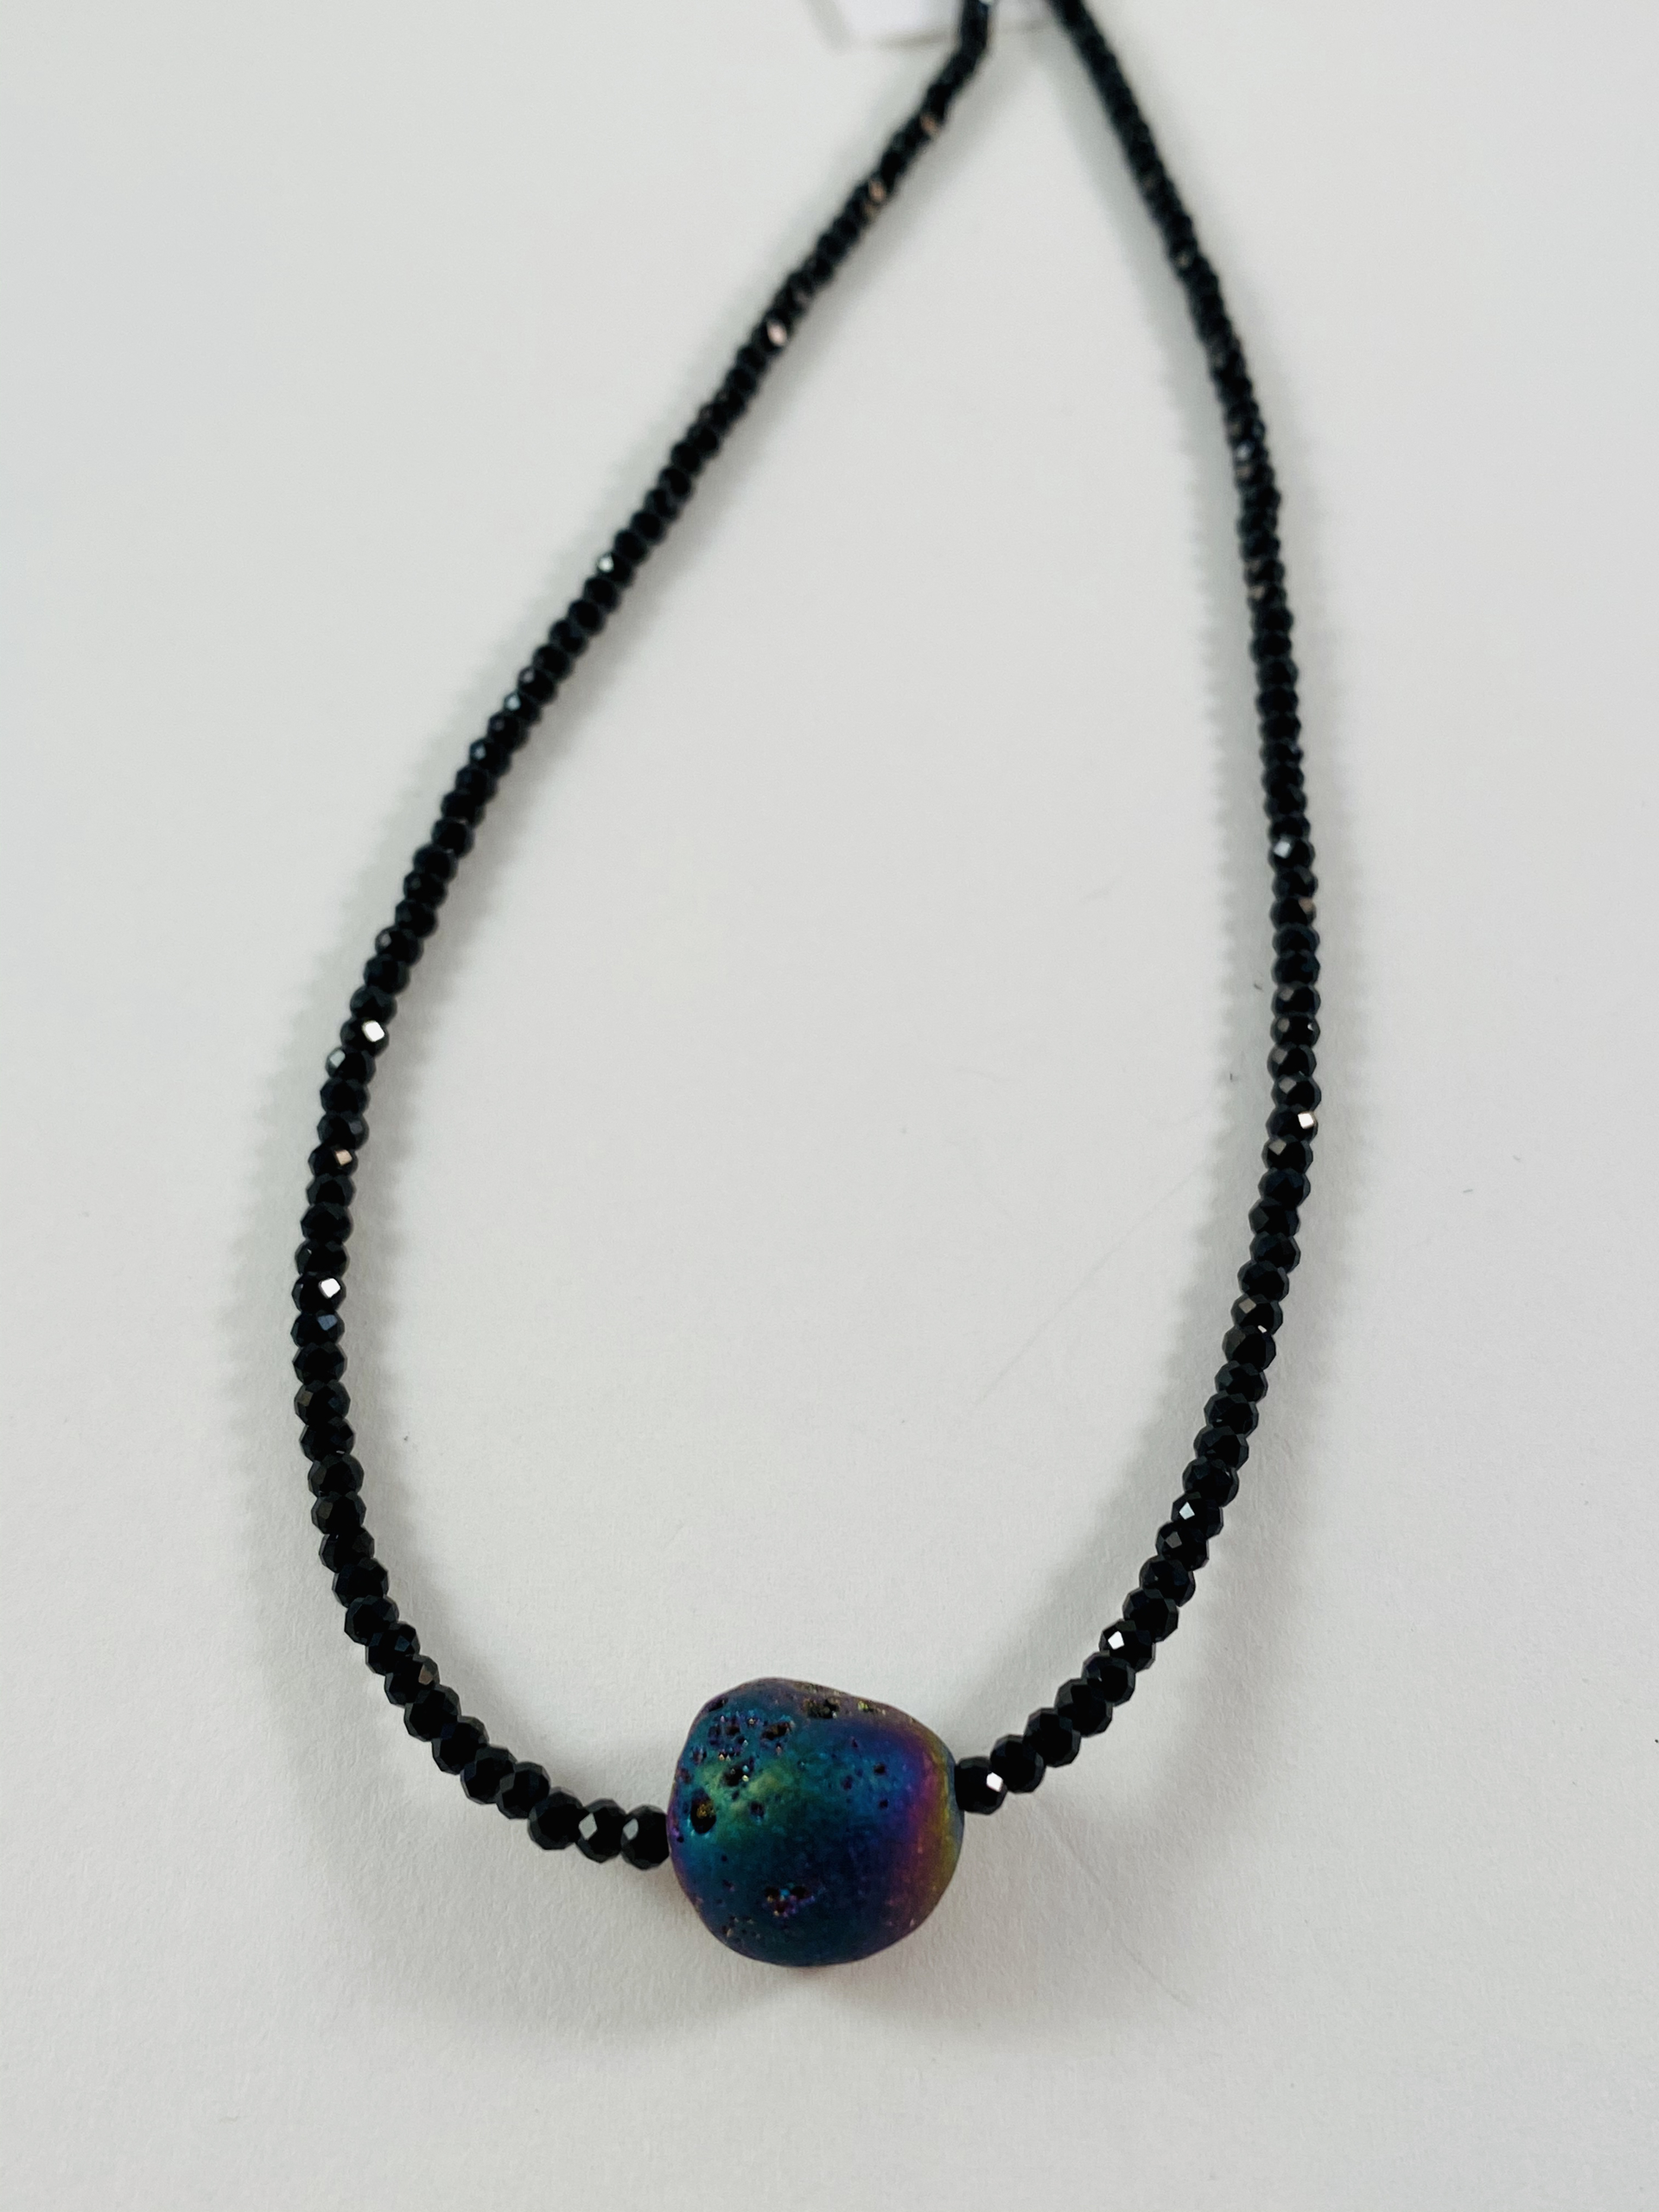 Faceted Black Spinel Necklace, titanium druzy pendant by Nance Trueworthy